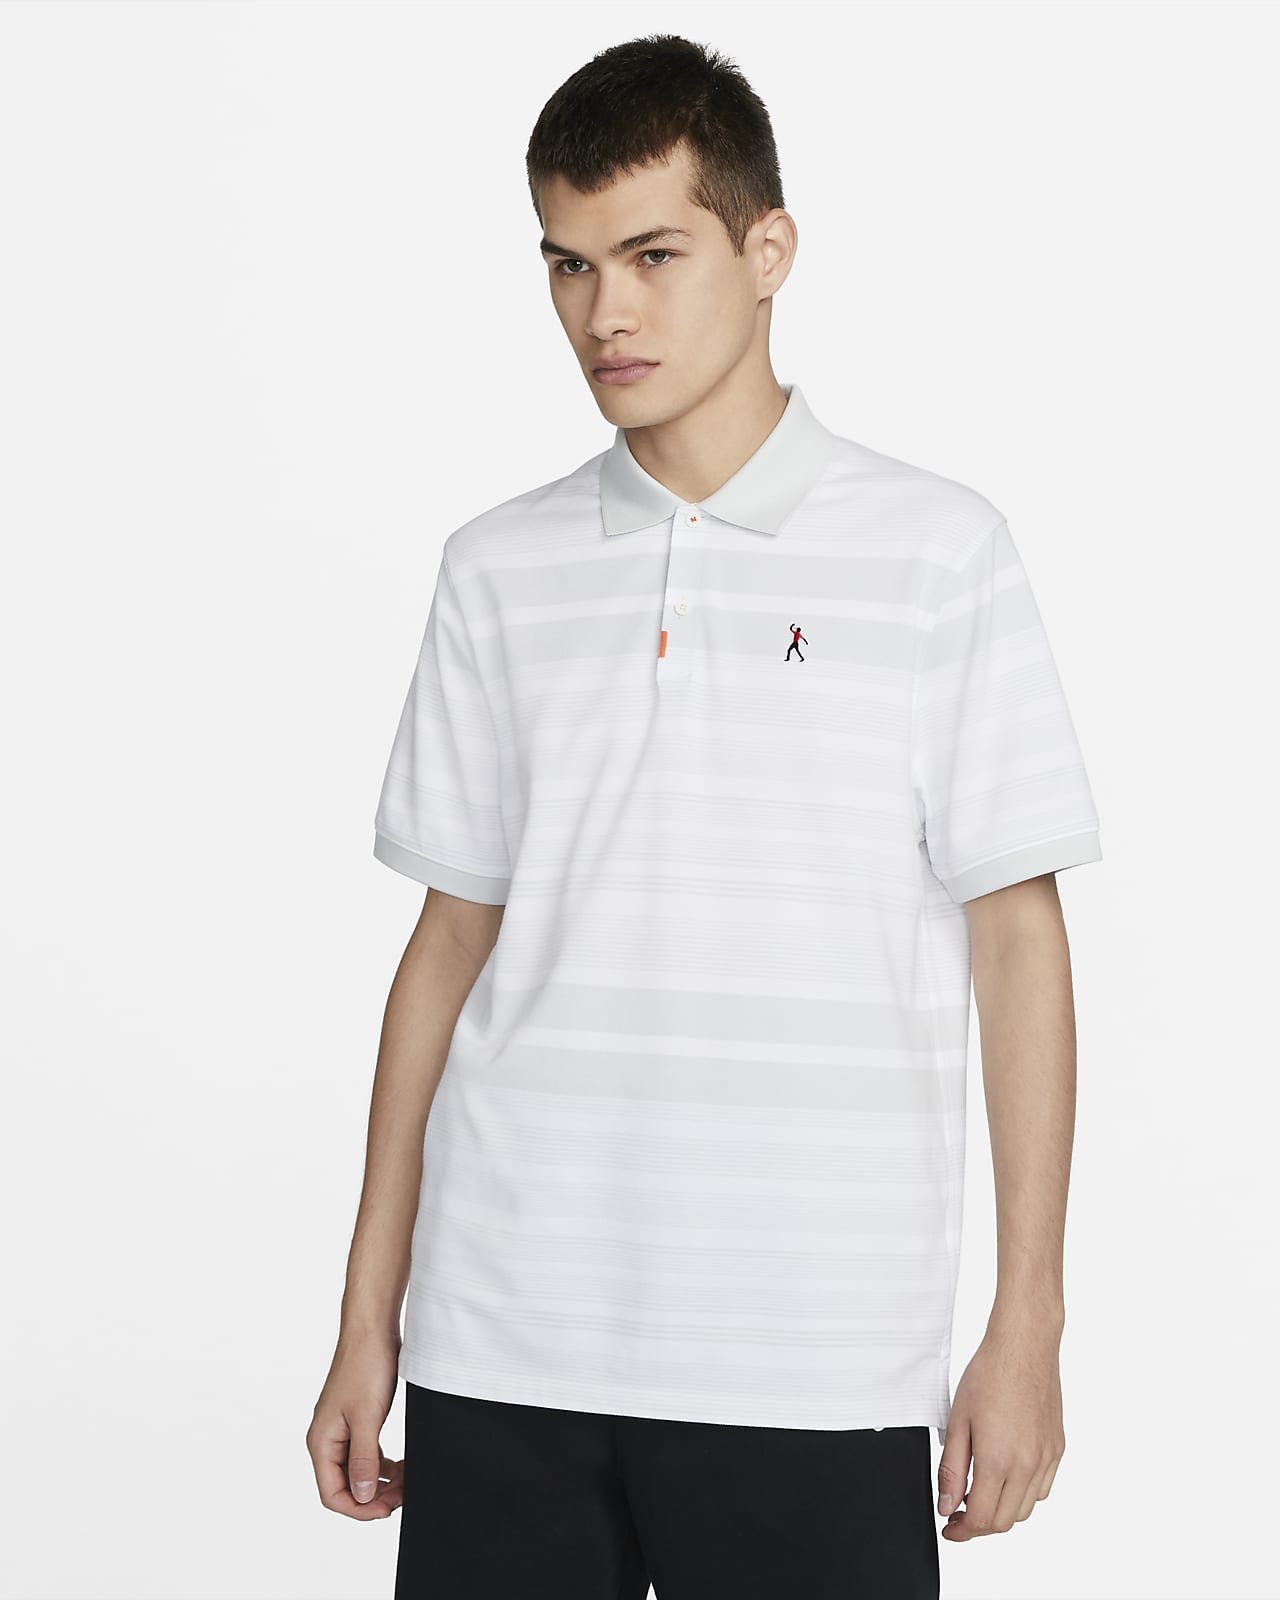 The Nike Polo Tiger Woods Men's Slim-Fit Polo